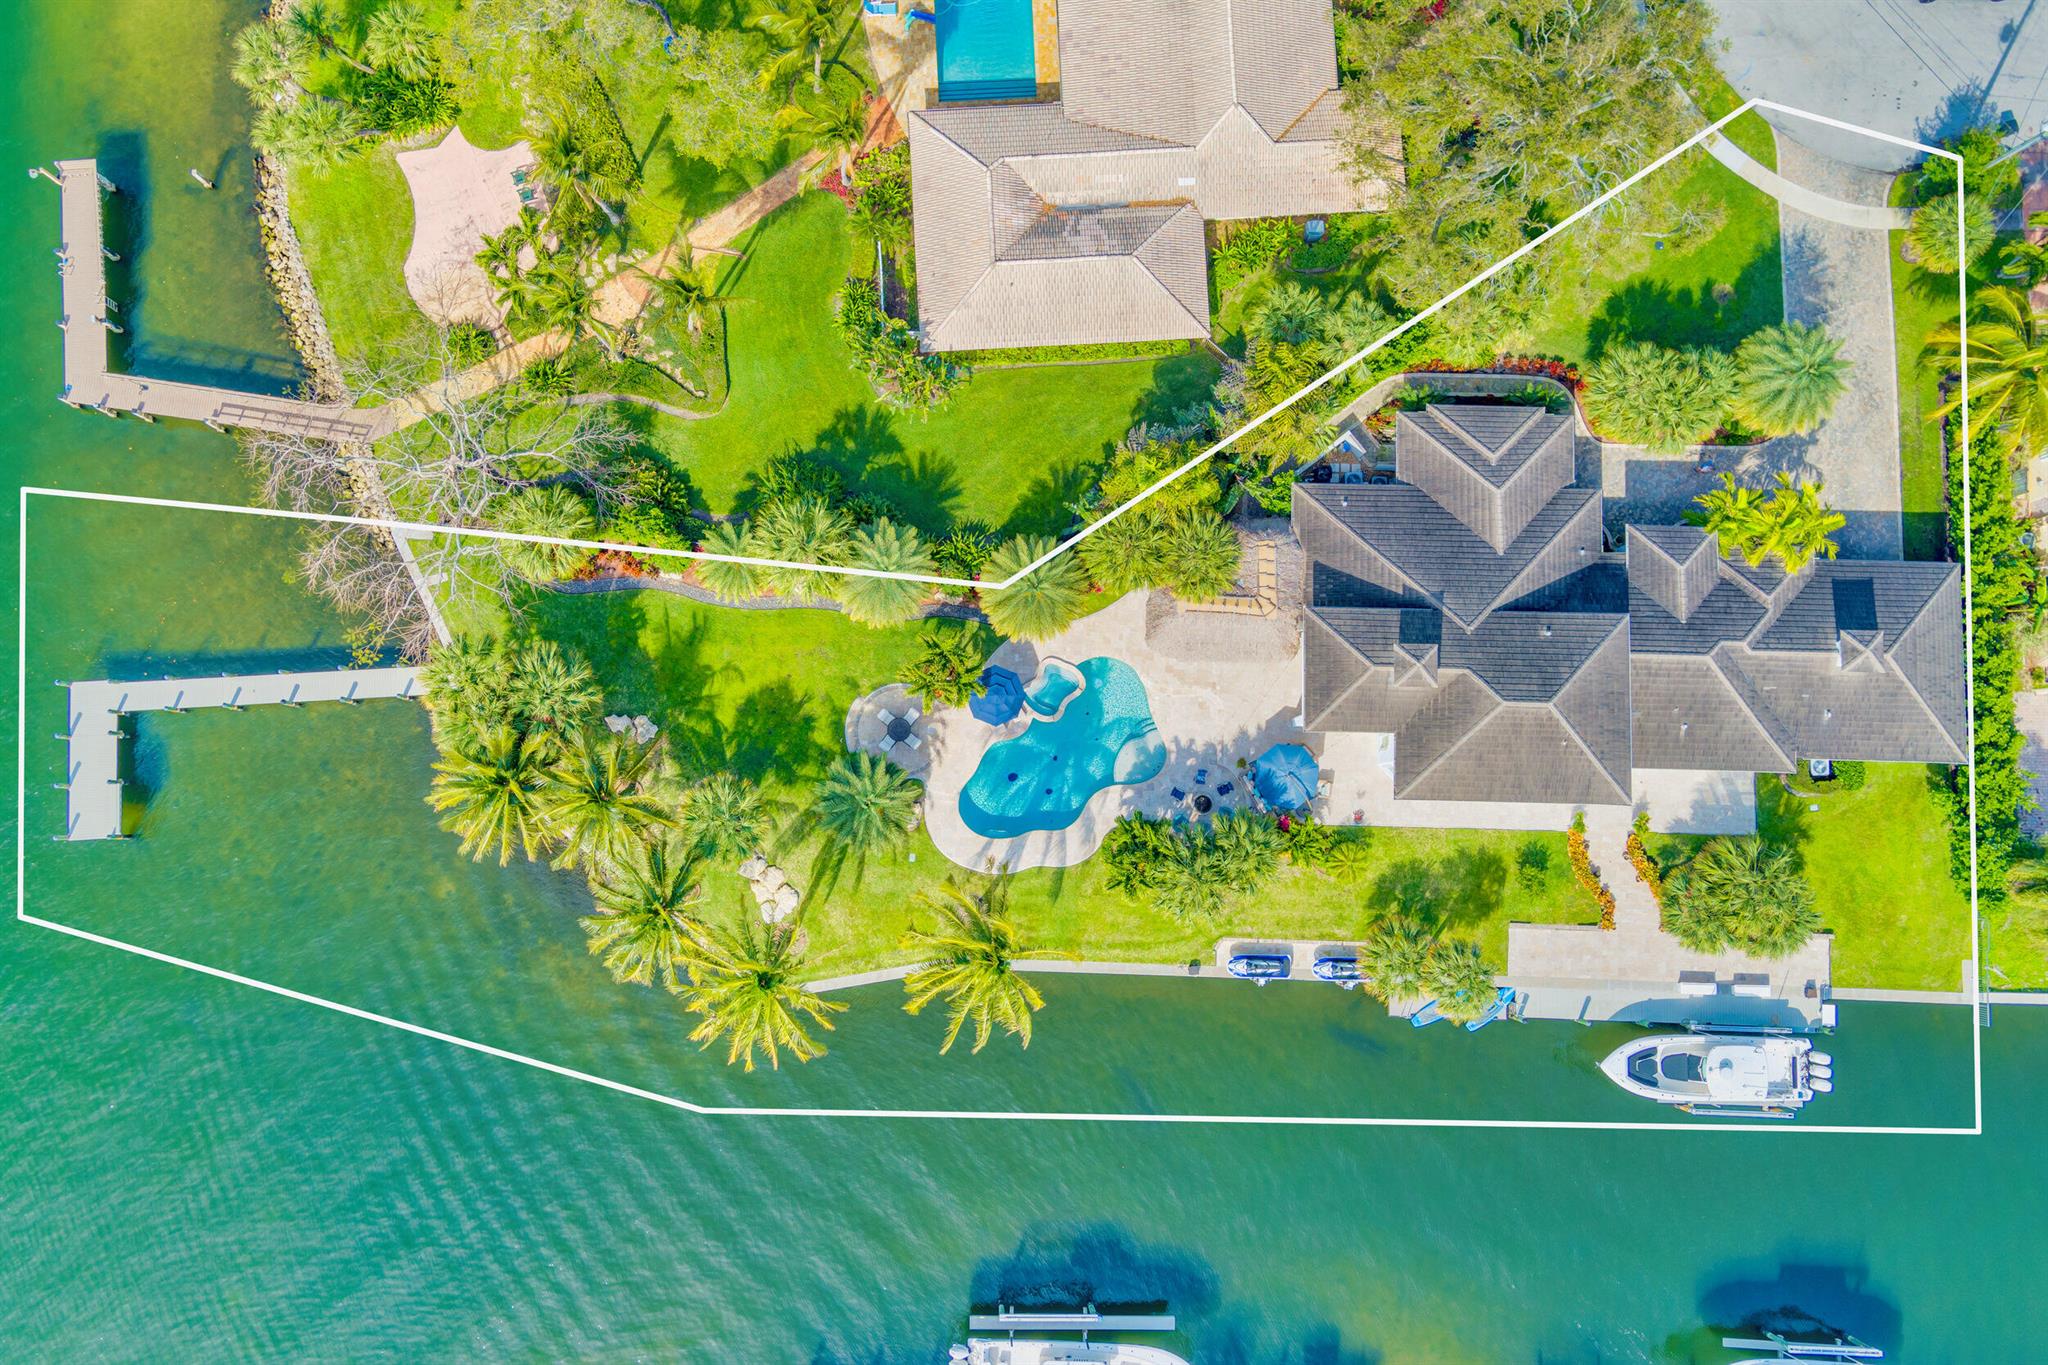 Welcome to your dream home! This rare intracoastal point property boasts unparalleled luxury and stunning waterfront views. Built in 2018, this 4-bedroom, 4-bathroom pool home offers the ultimate in waterfront living. With over 300 ft of water frontage and over 700 ft line of site across the intracoastal, this home features a deep water dock with no fixed bridges in a no wake zone, one private boat lift on a 60 ft. dock, and two jet ski lifts. Over 2,000 sq. ft of outdoor deck and walkways, you'll enjoy endless entertaining with your tiki and full outdoor kitchen. Inside, two primary bedrooms (one upstairs & one downstairs) offer privacy and comfort. The upstairs primary bedroom includes a separate living area and a big outdoor balcony where you can enjoy  spectacular sunset views. Modern finishes in the bathrooms and kitchen with high-end appliances. Porcelain tile throughout the living area with carpet in the bedrooms. Two additional bedrooms and a den/office downstairs complete this exquisite home, offering the ultimate waterfront lifestyle.